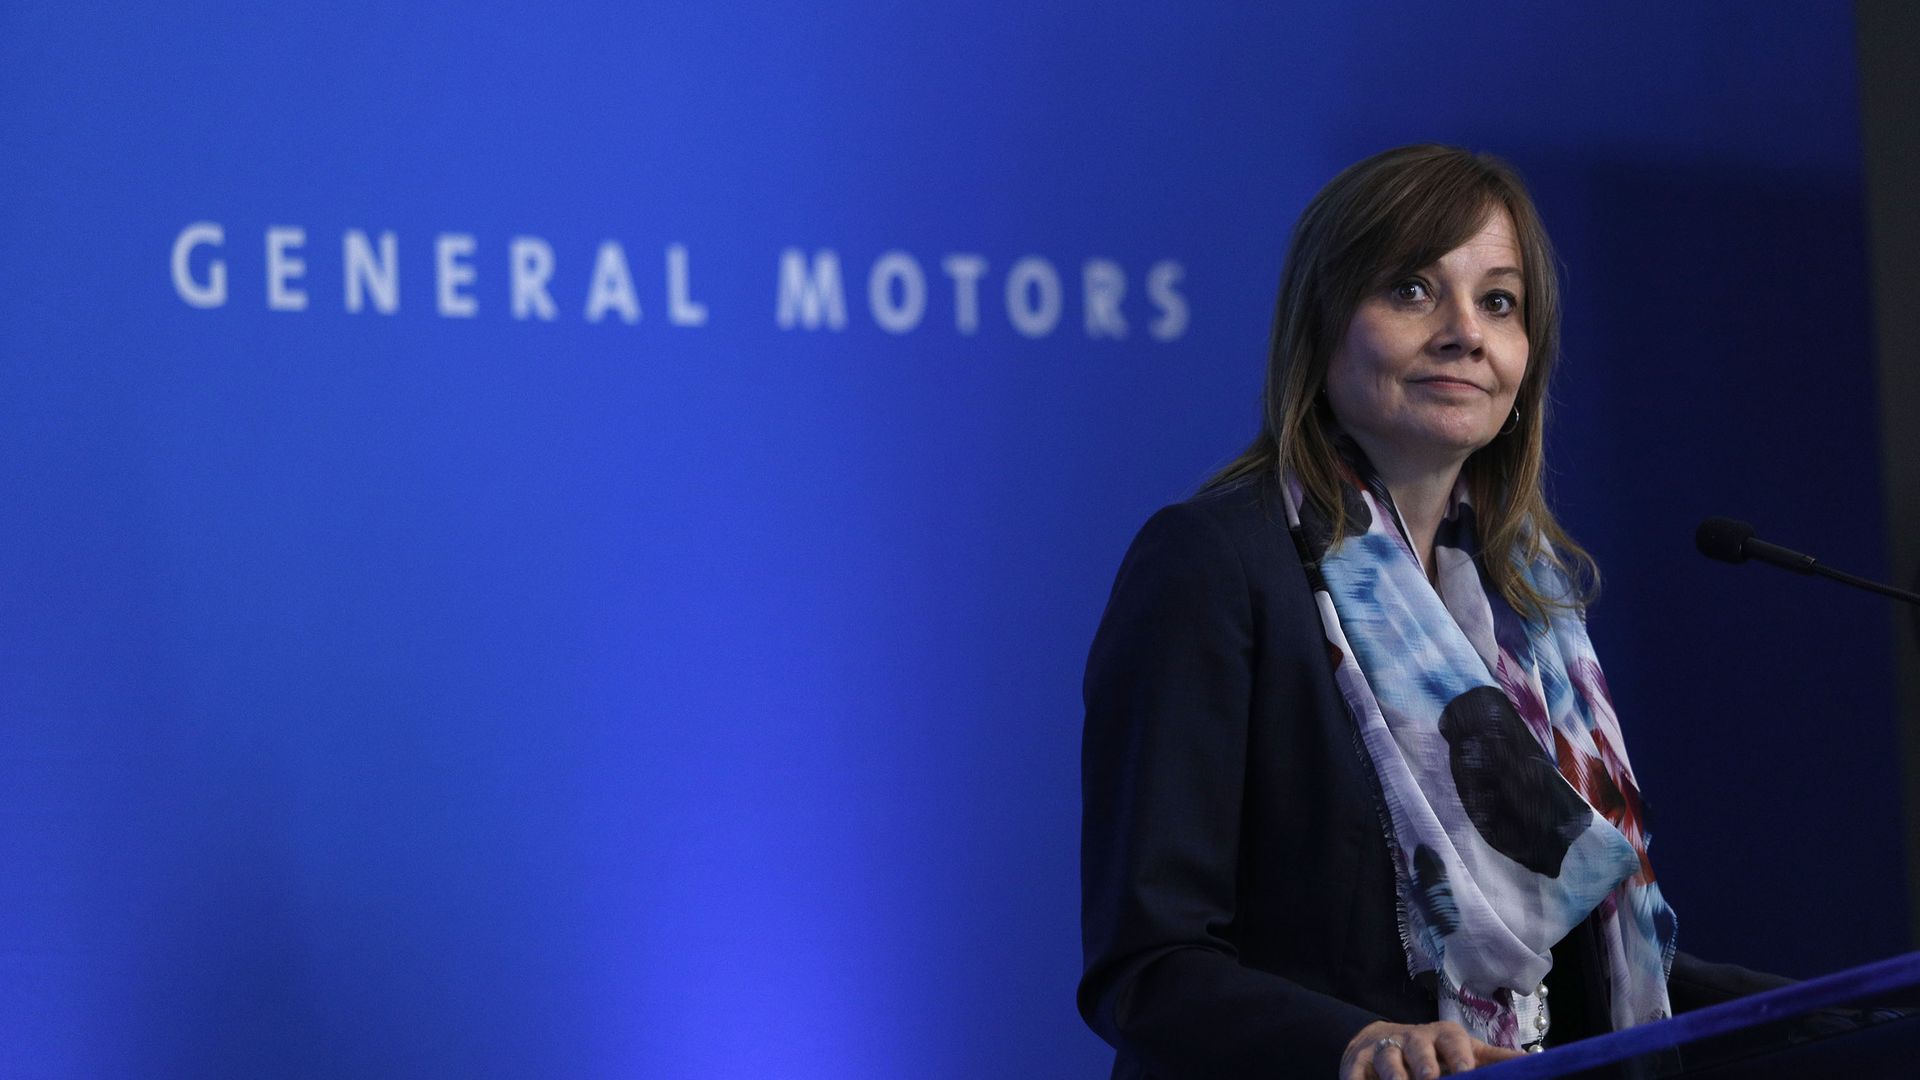  General Motors CEO Mary Barra speaks in front of a blue backdrop with white letters that spell "General Motors"